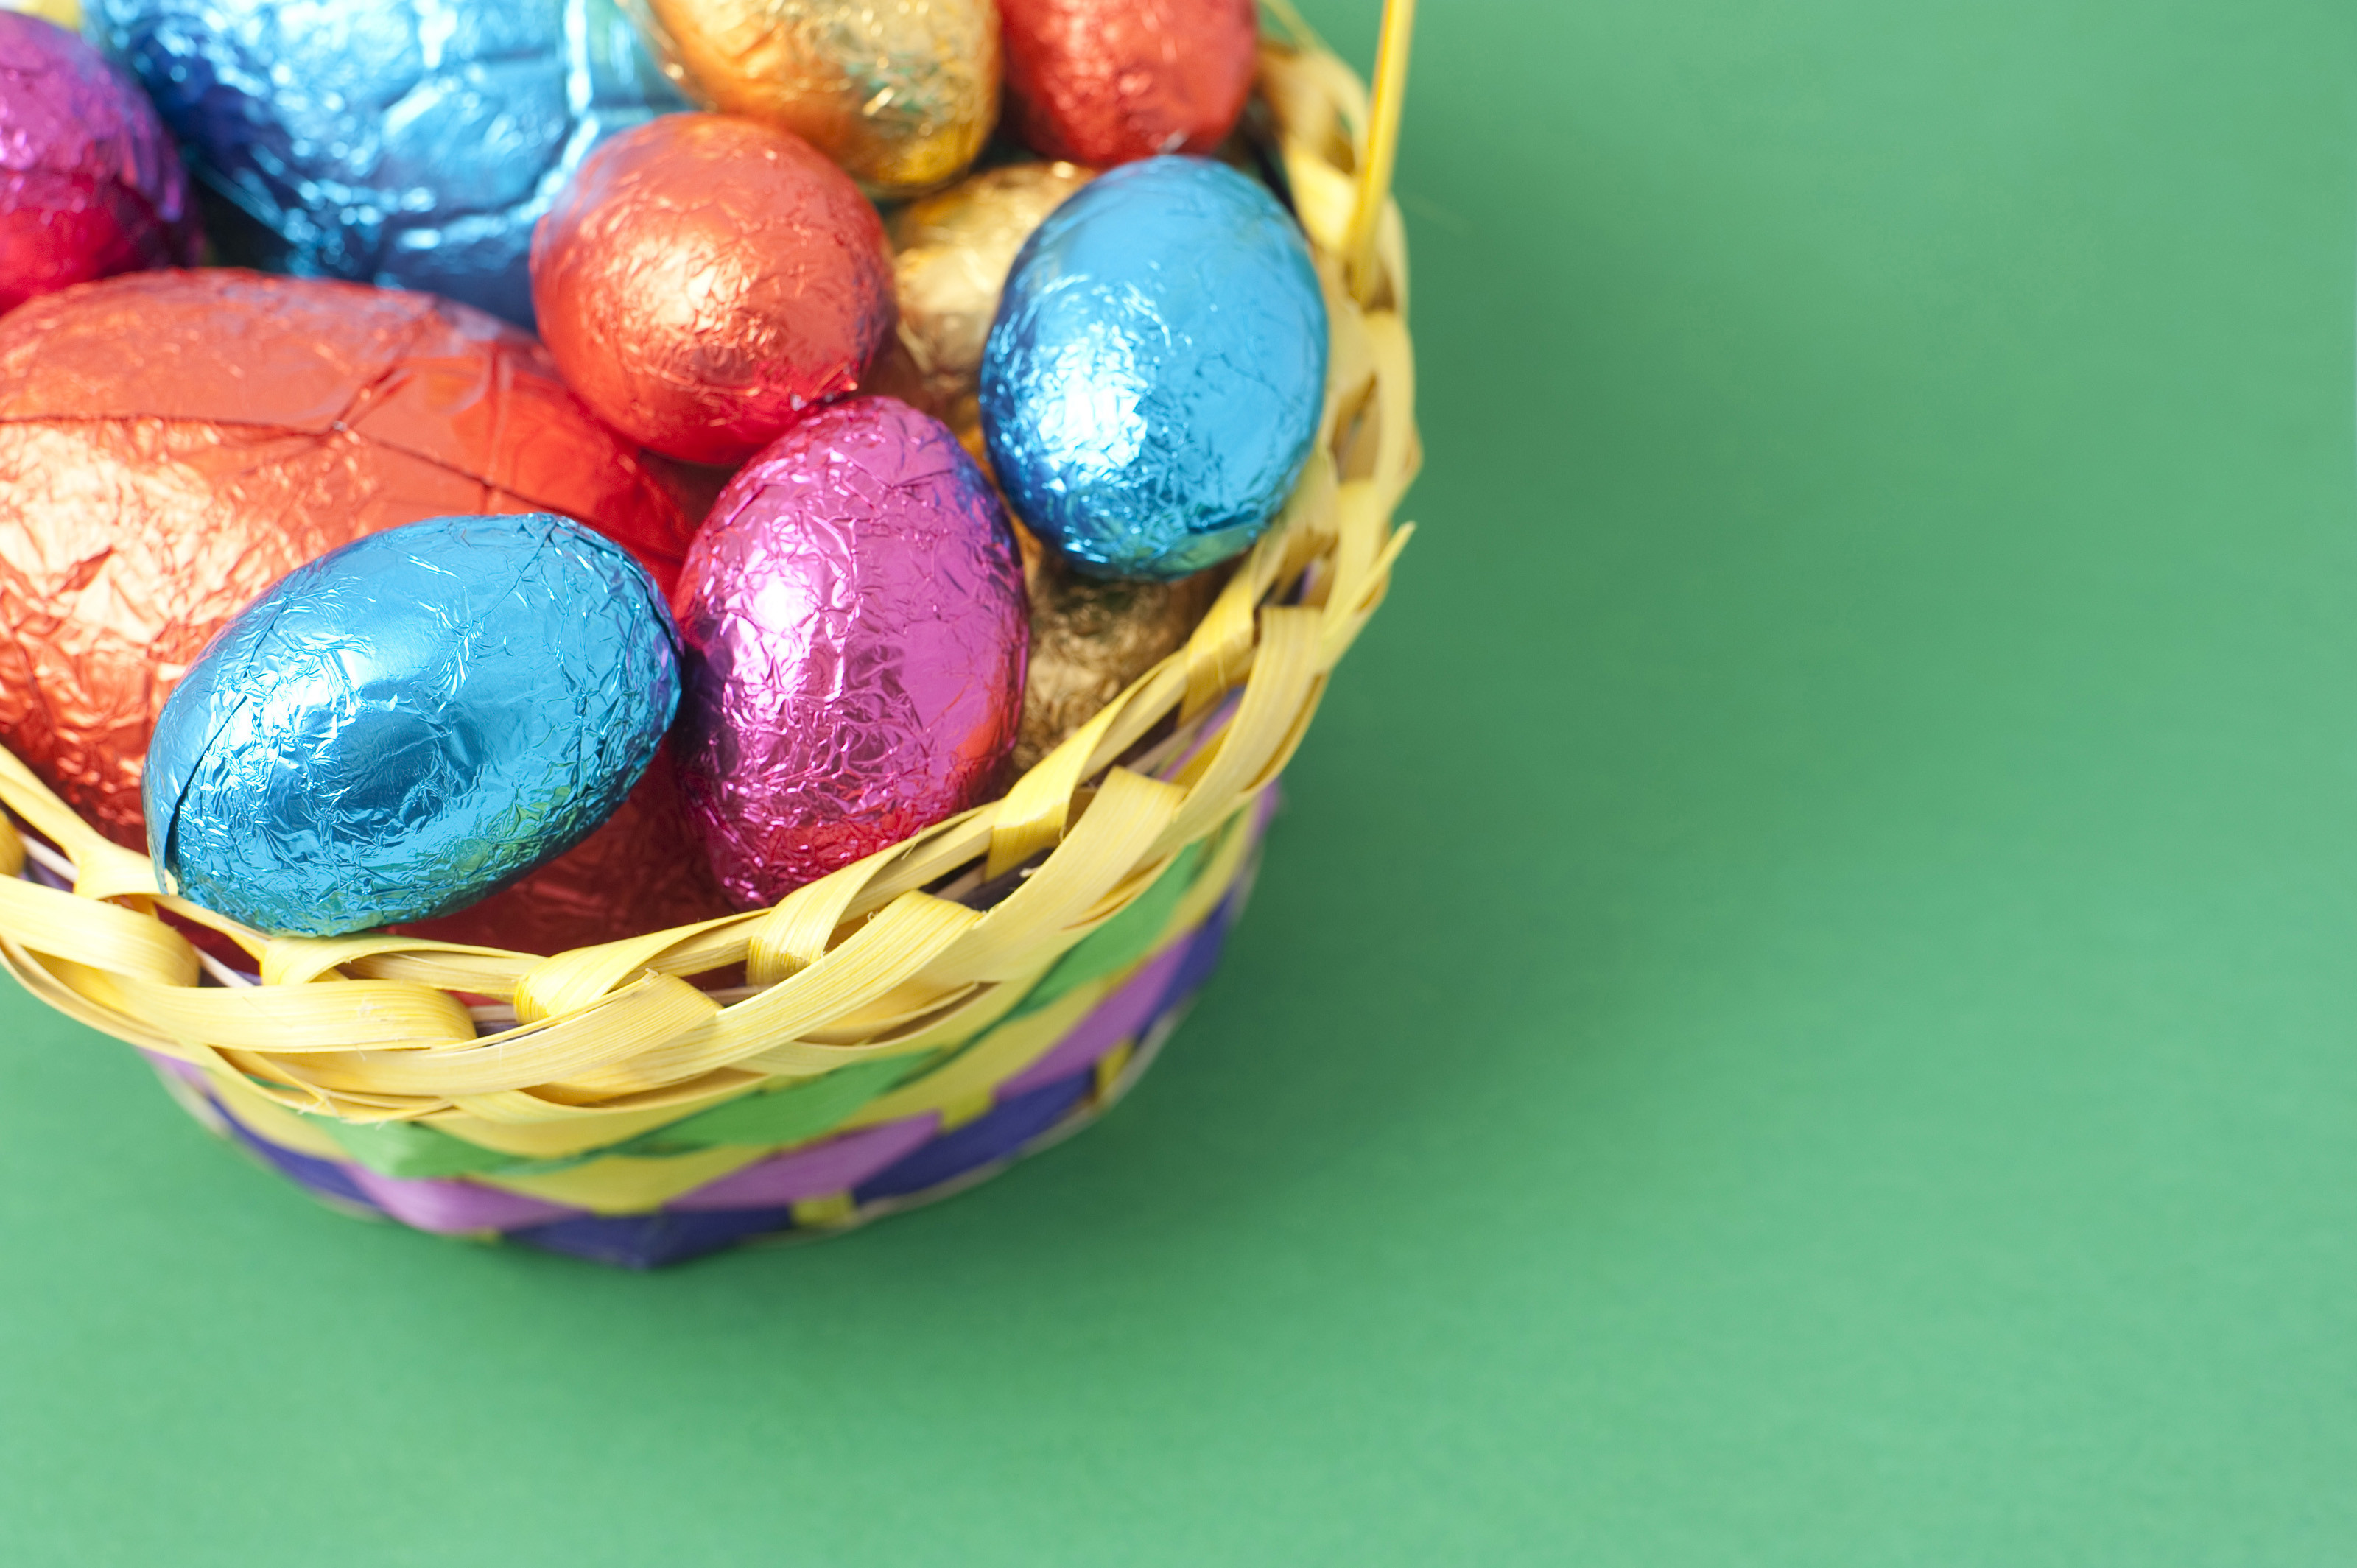 3200x2129 Easter Egg background with a basket filled with colourful foil wrapped eggs  in one corner and